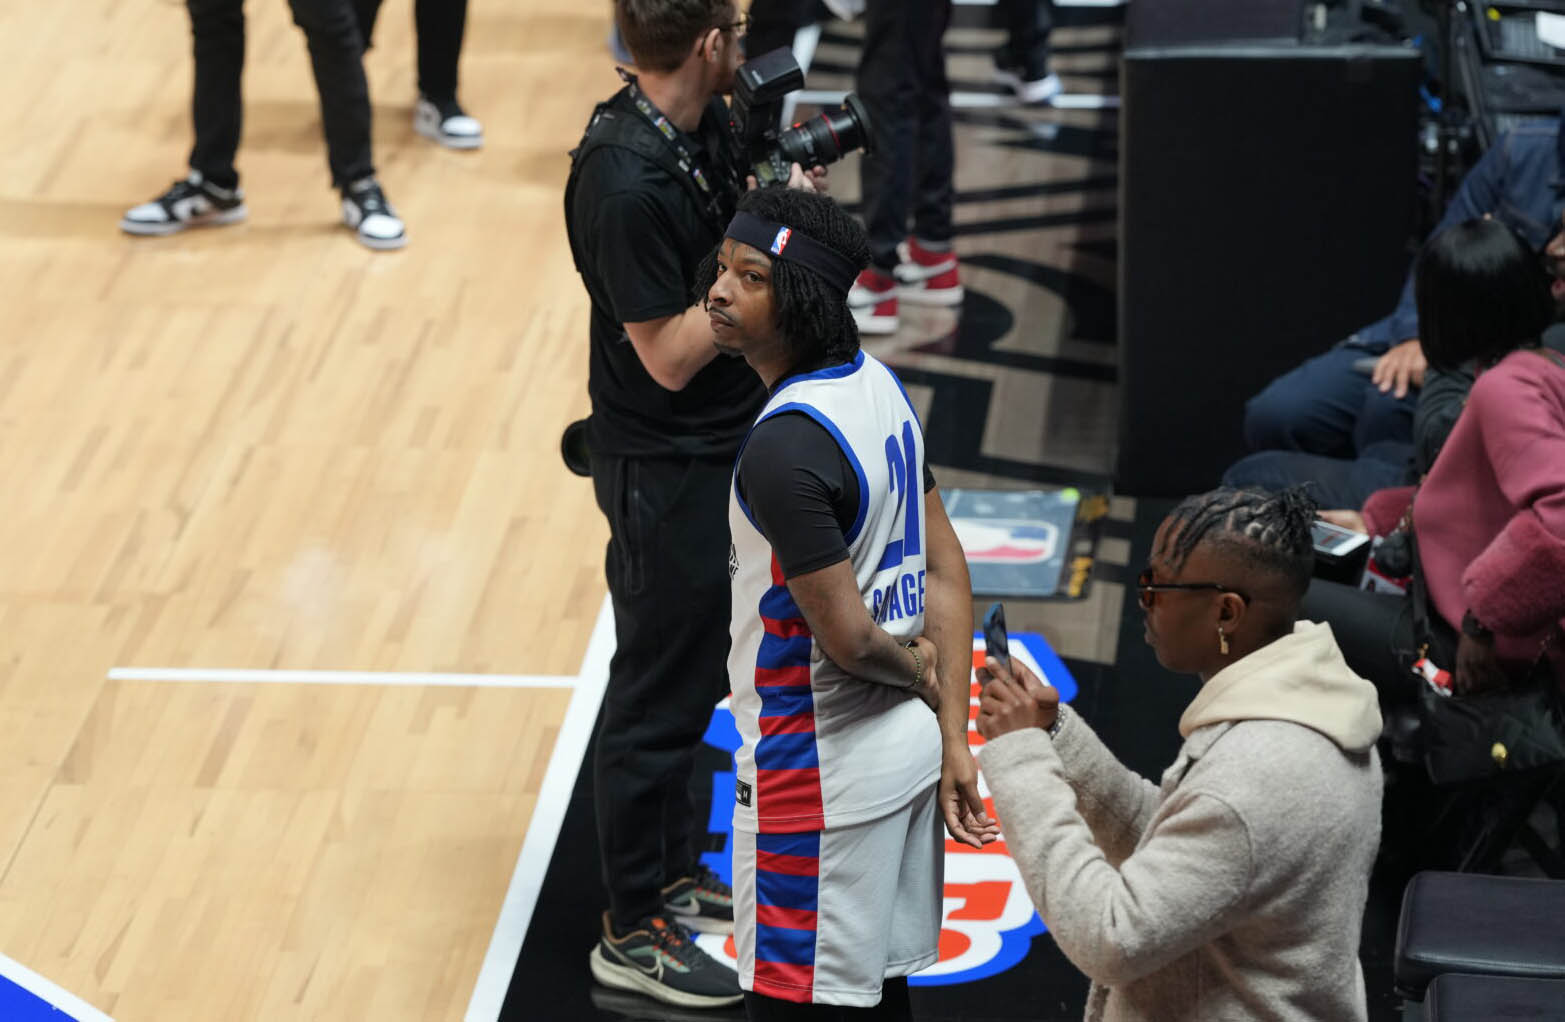 21 Savage at celebrity all-star game